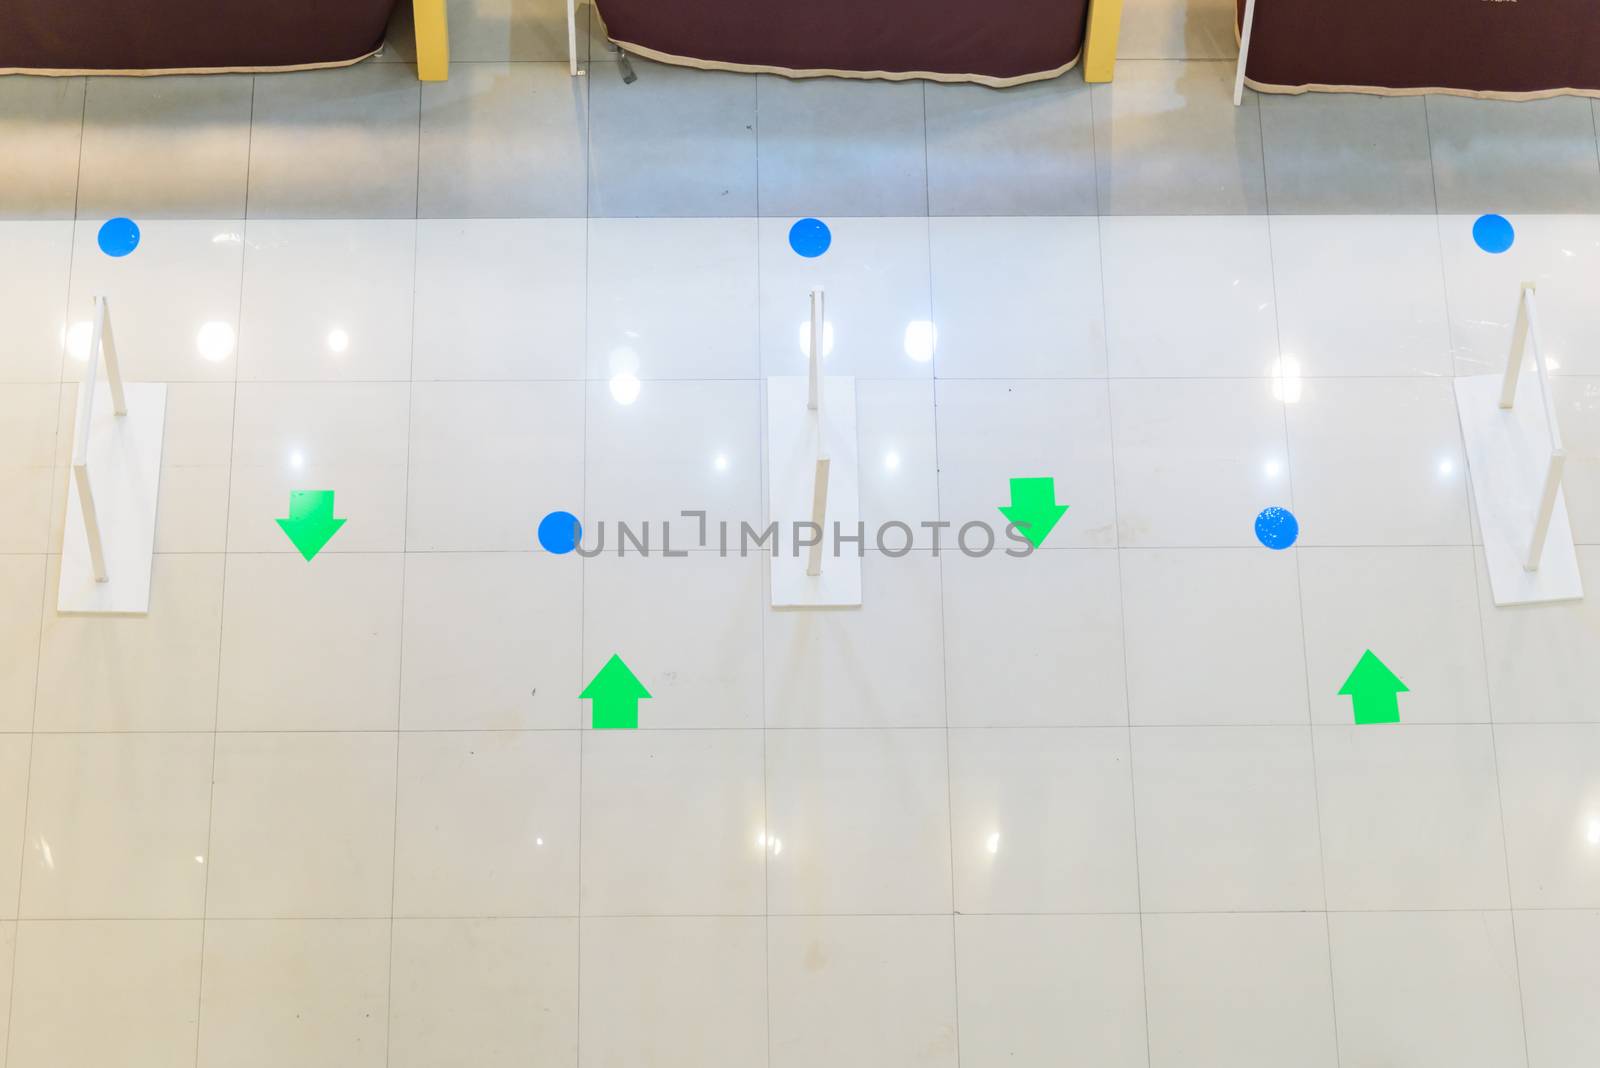 social distancing sign at the floor for shopping Queue by rukawajung